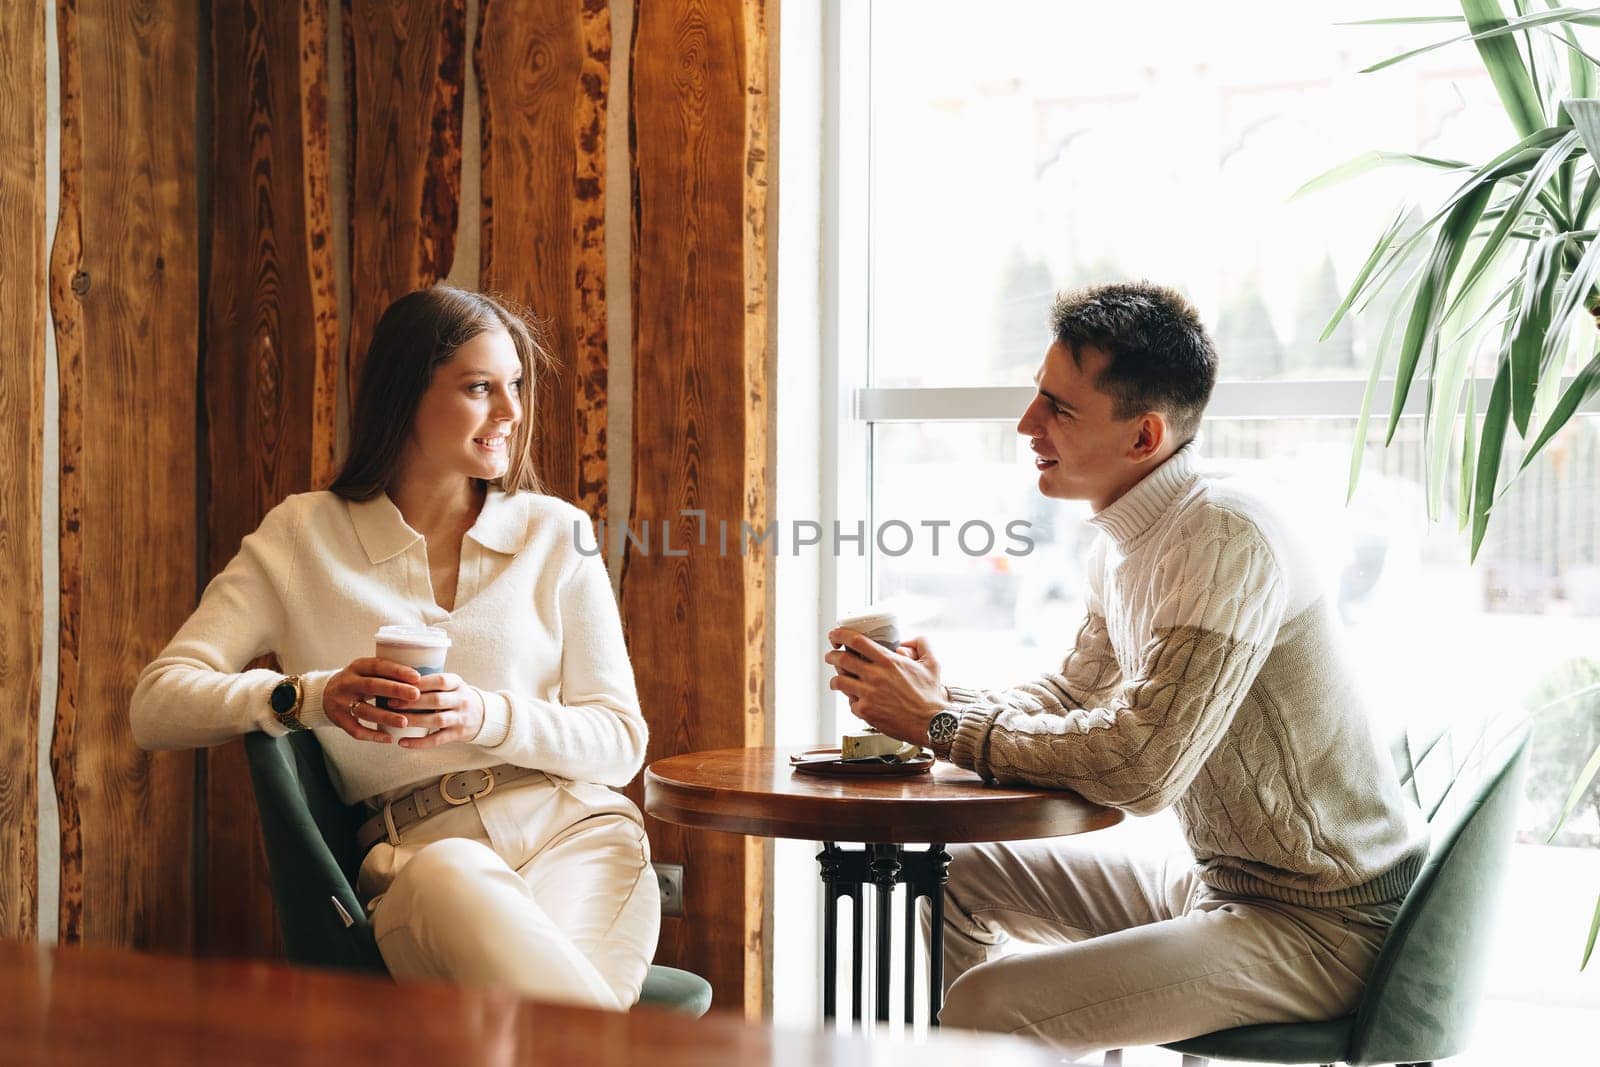 A woman and a man are sitting at a wooden table in a warmly lit cafe, their faces animated in what appears to be a relaxed conversation. The woman holds a paper cup, possibly containing coffee, as they both enjoy a comfortable moment together, surrounded by an ambiance of casual chatter.